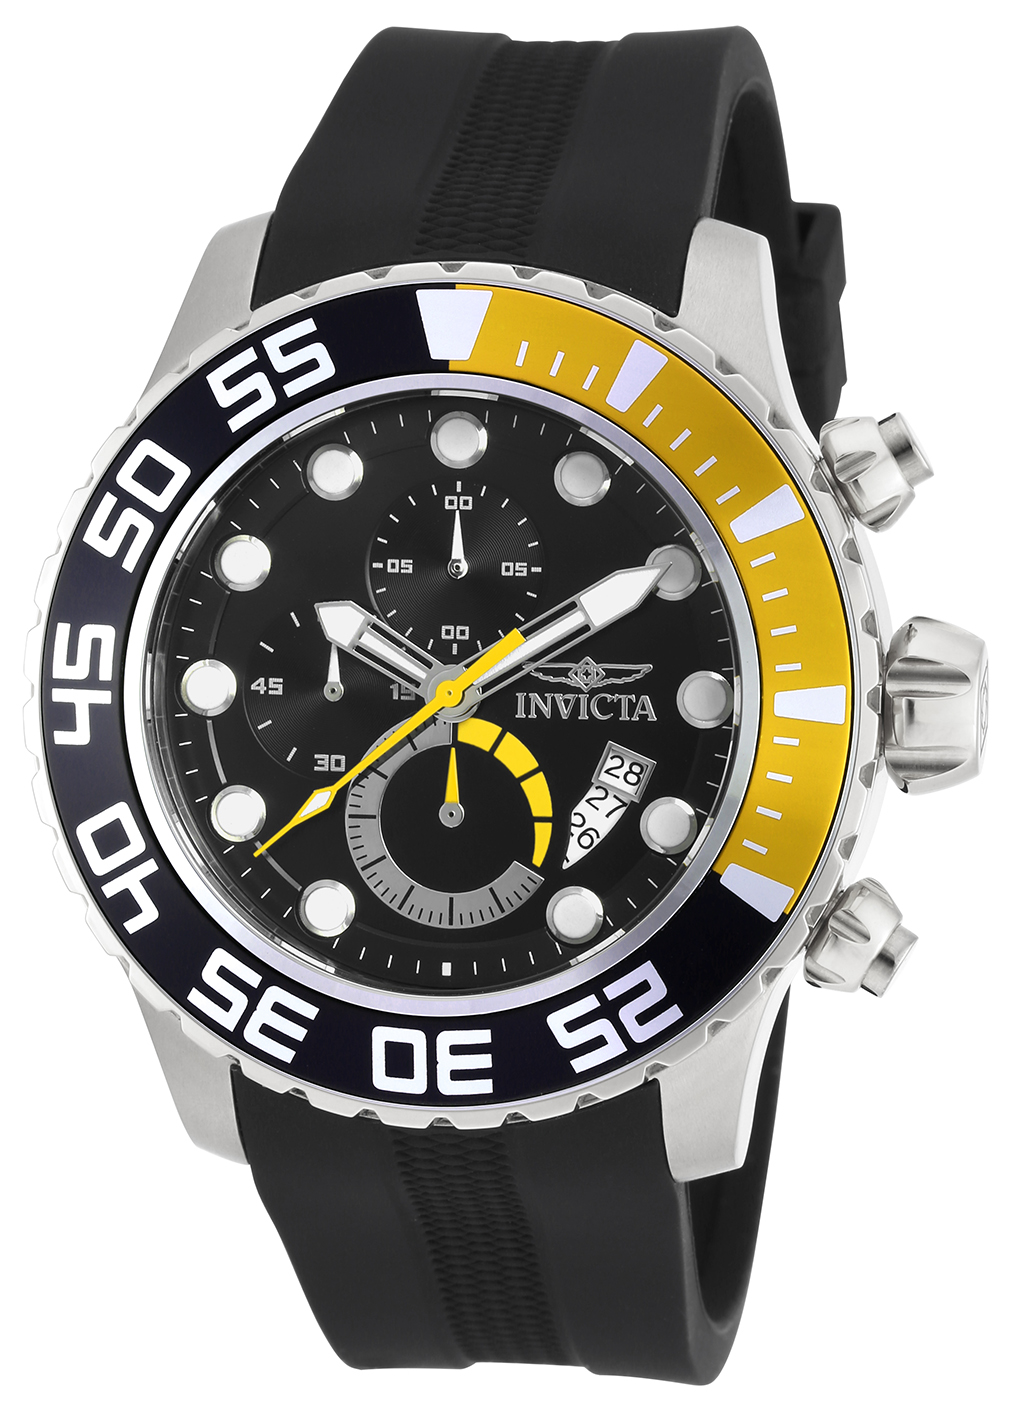 Pre-Owned Invicta Pro Diver Quartz Men's Watch - 52mm Stainless Steel Case, Polyurethane Band, Black (AIC-20449)